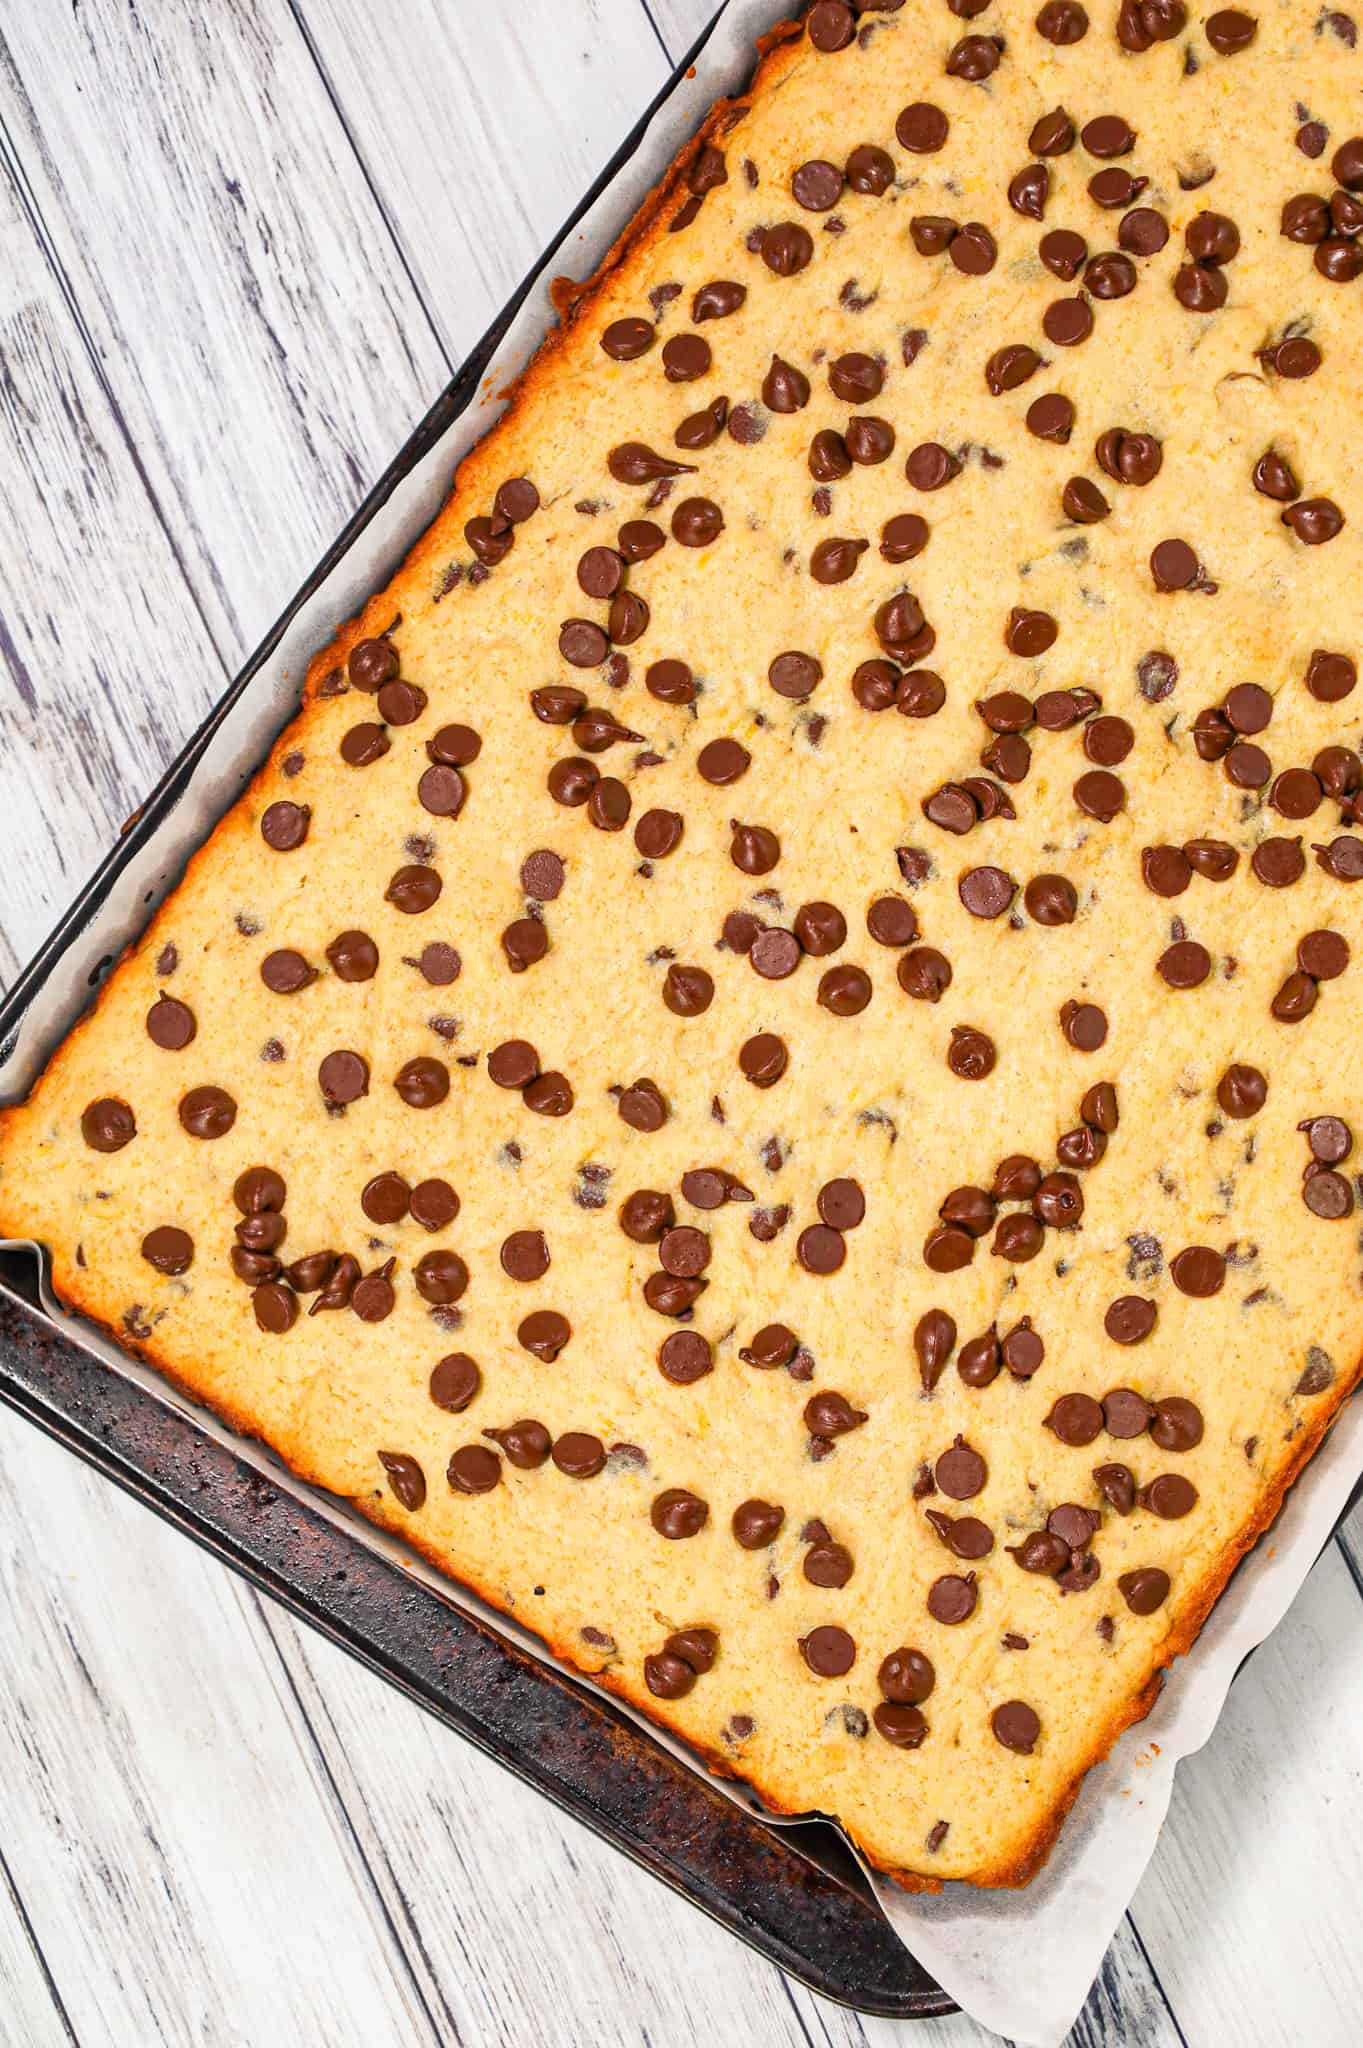 Banana Chocolate Chip Bars are an easy dessert recipe made with ripe bananas and loaded with semi sweet chocolate chips.